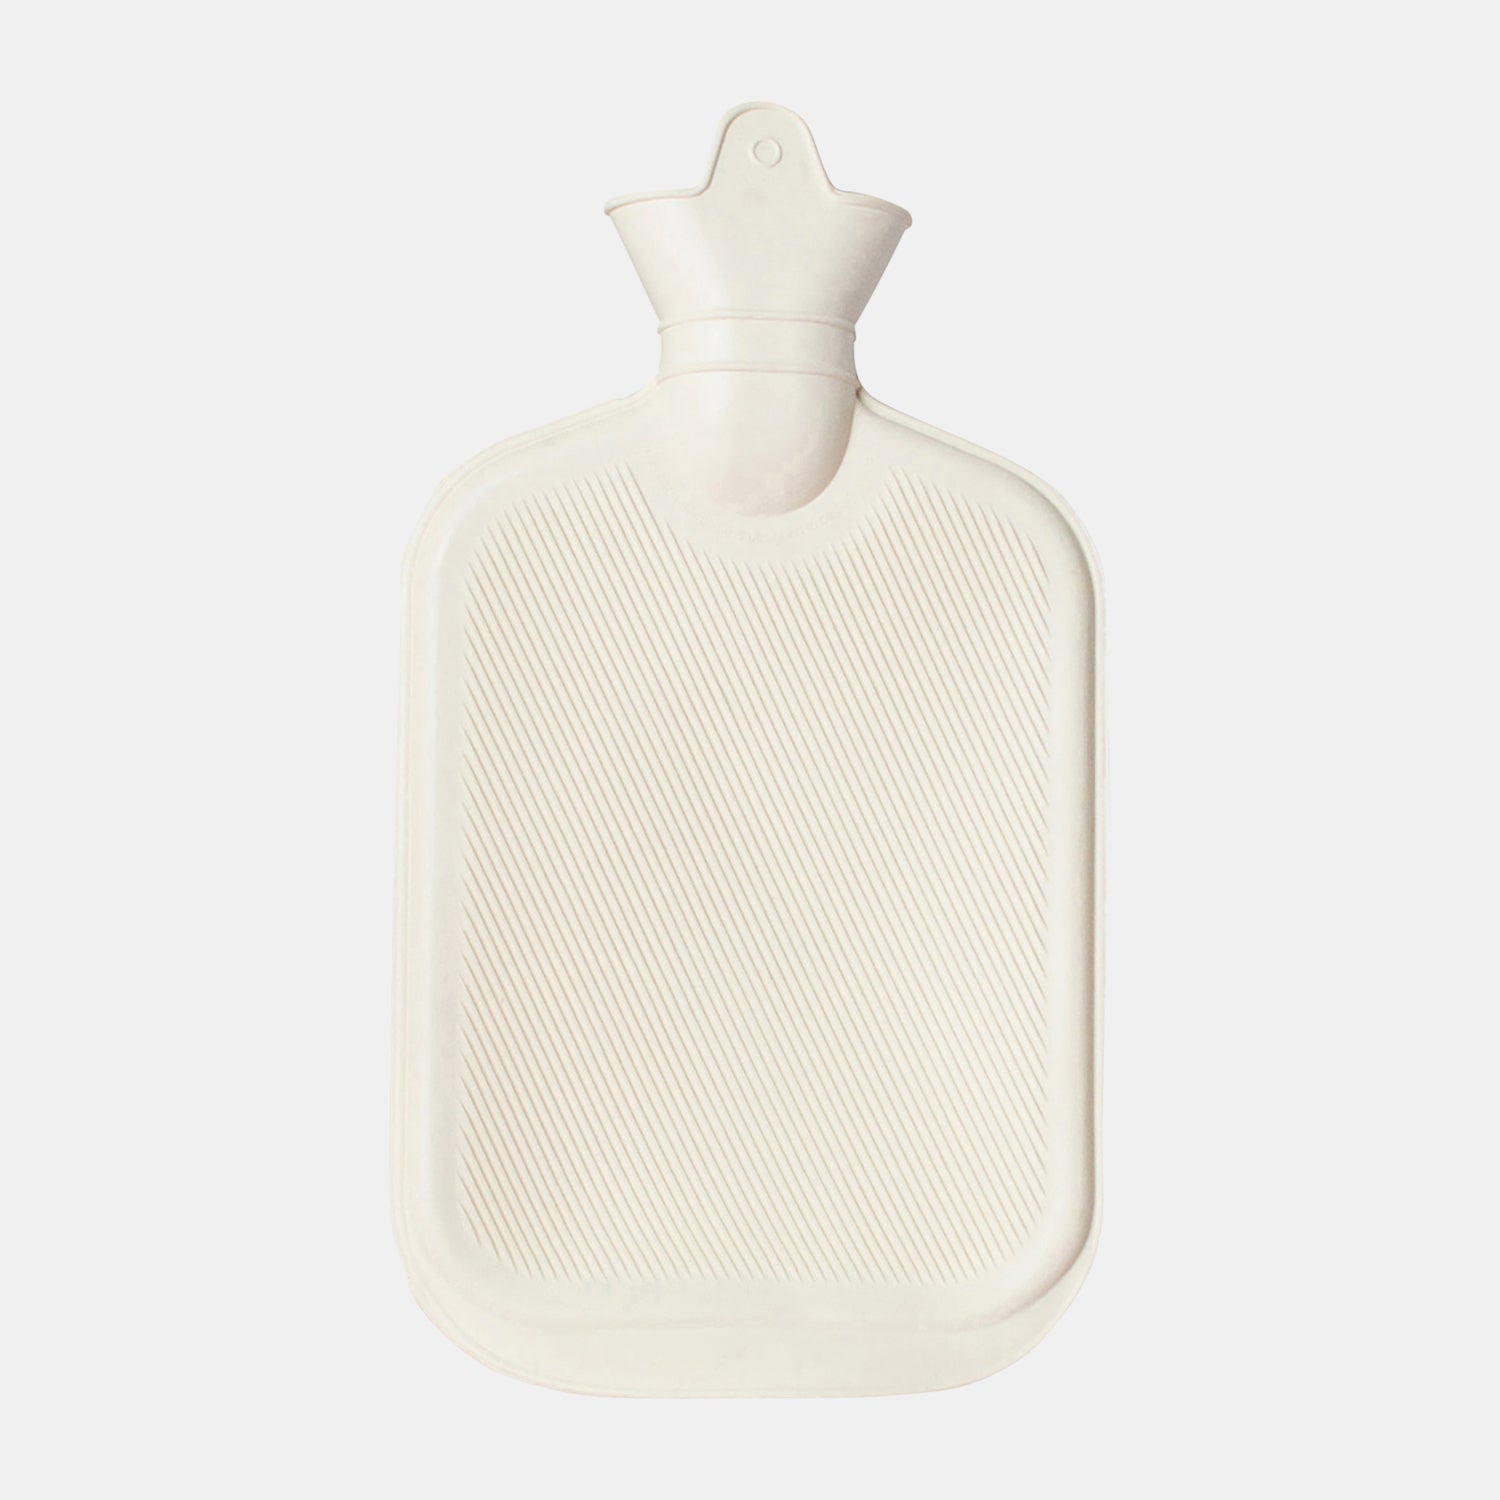 Hot water bottle rubber, Small